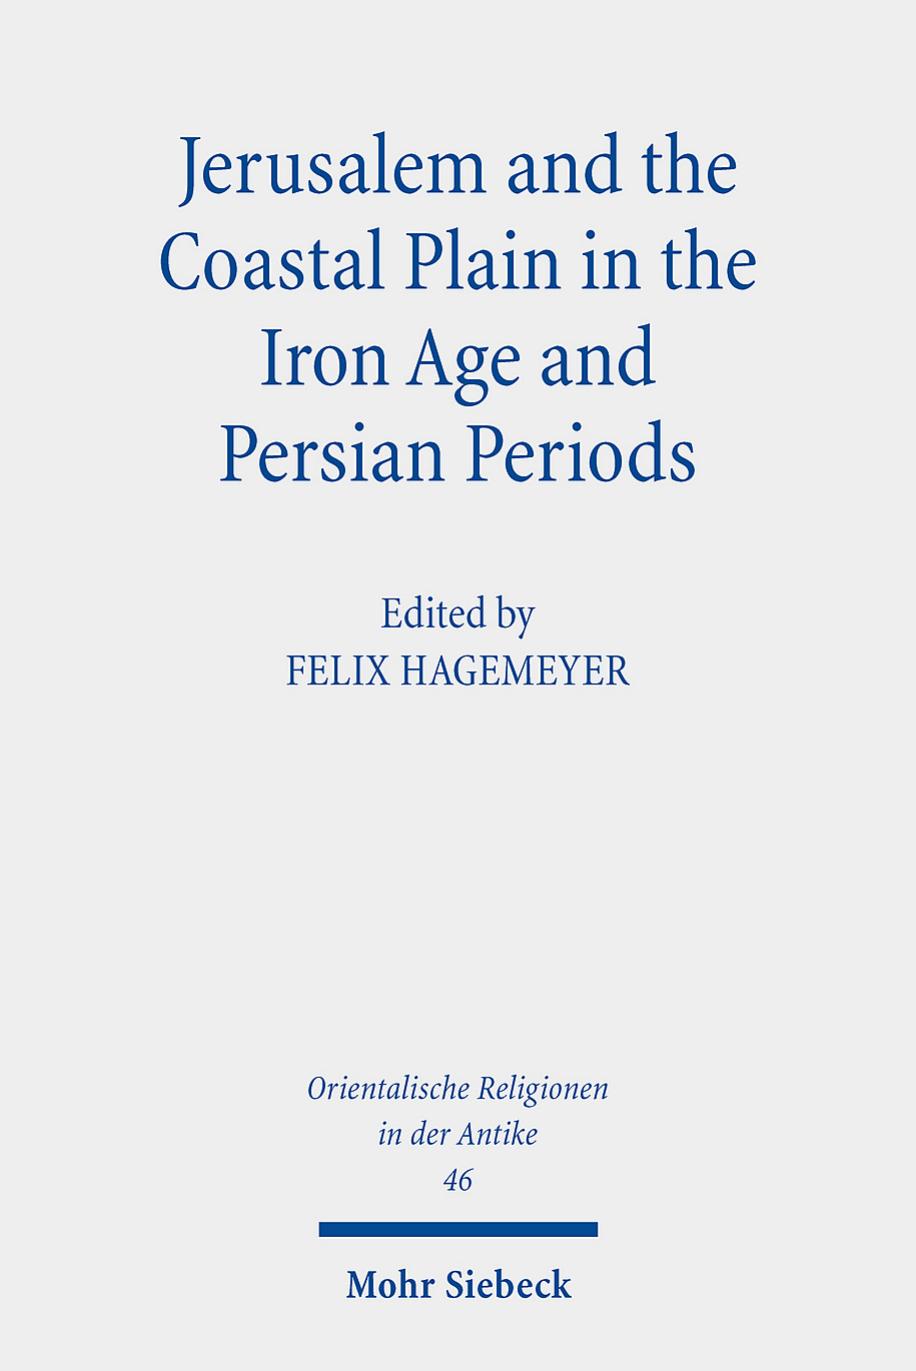 Jerusalem and the Coastal Plain in the Iron Age and Persian Periods by Felix Hagemeyer